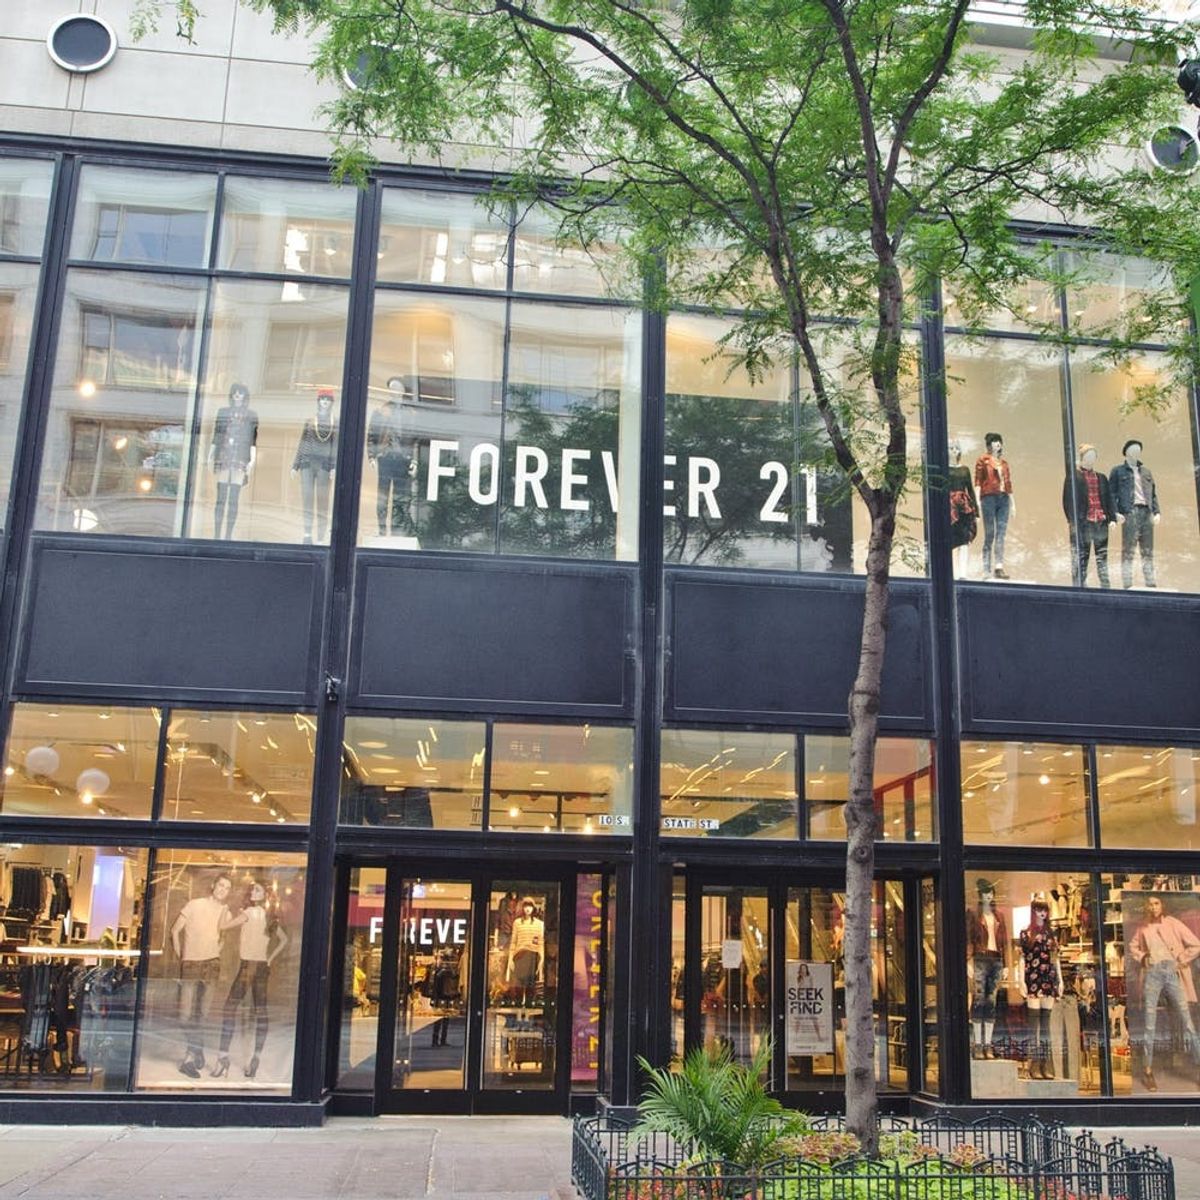 A Former Forever 21 Employee Is Suing the Company for Not Protecting Her Privacy